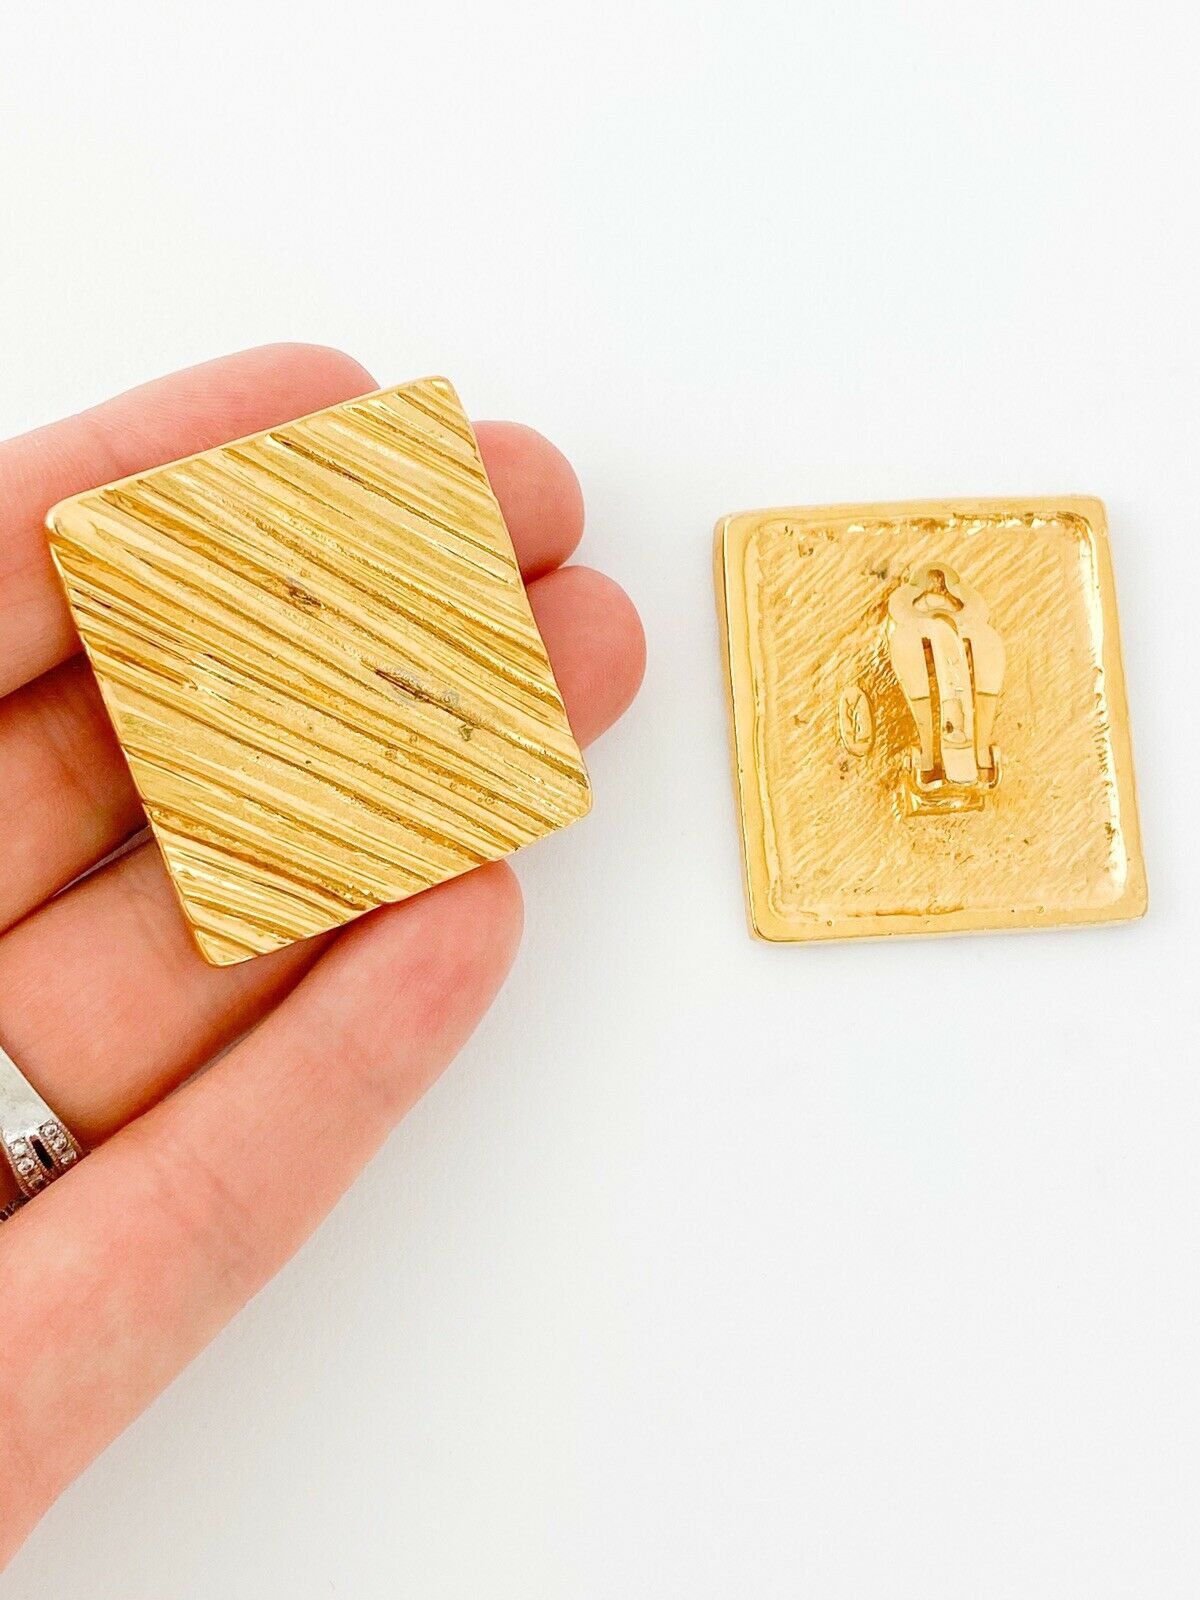 【SOLD OUT】YSL YVES SAINT LAURENT VINTAGE TEXTURED GOLD PLATED EARRINGS RECTANGLE